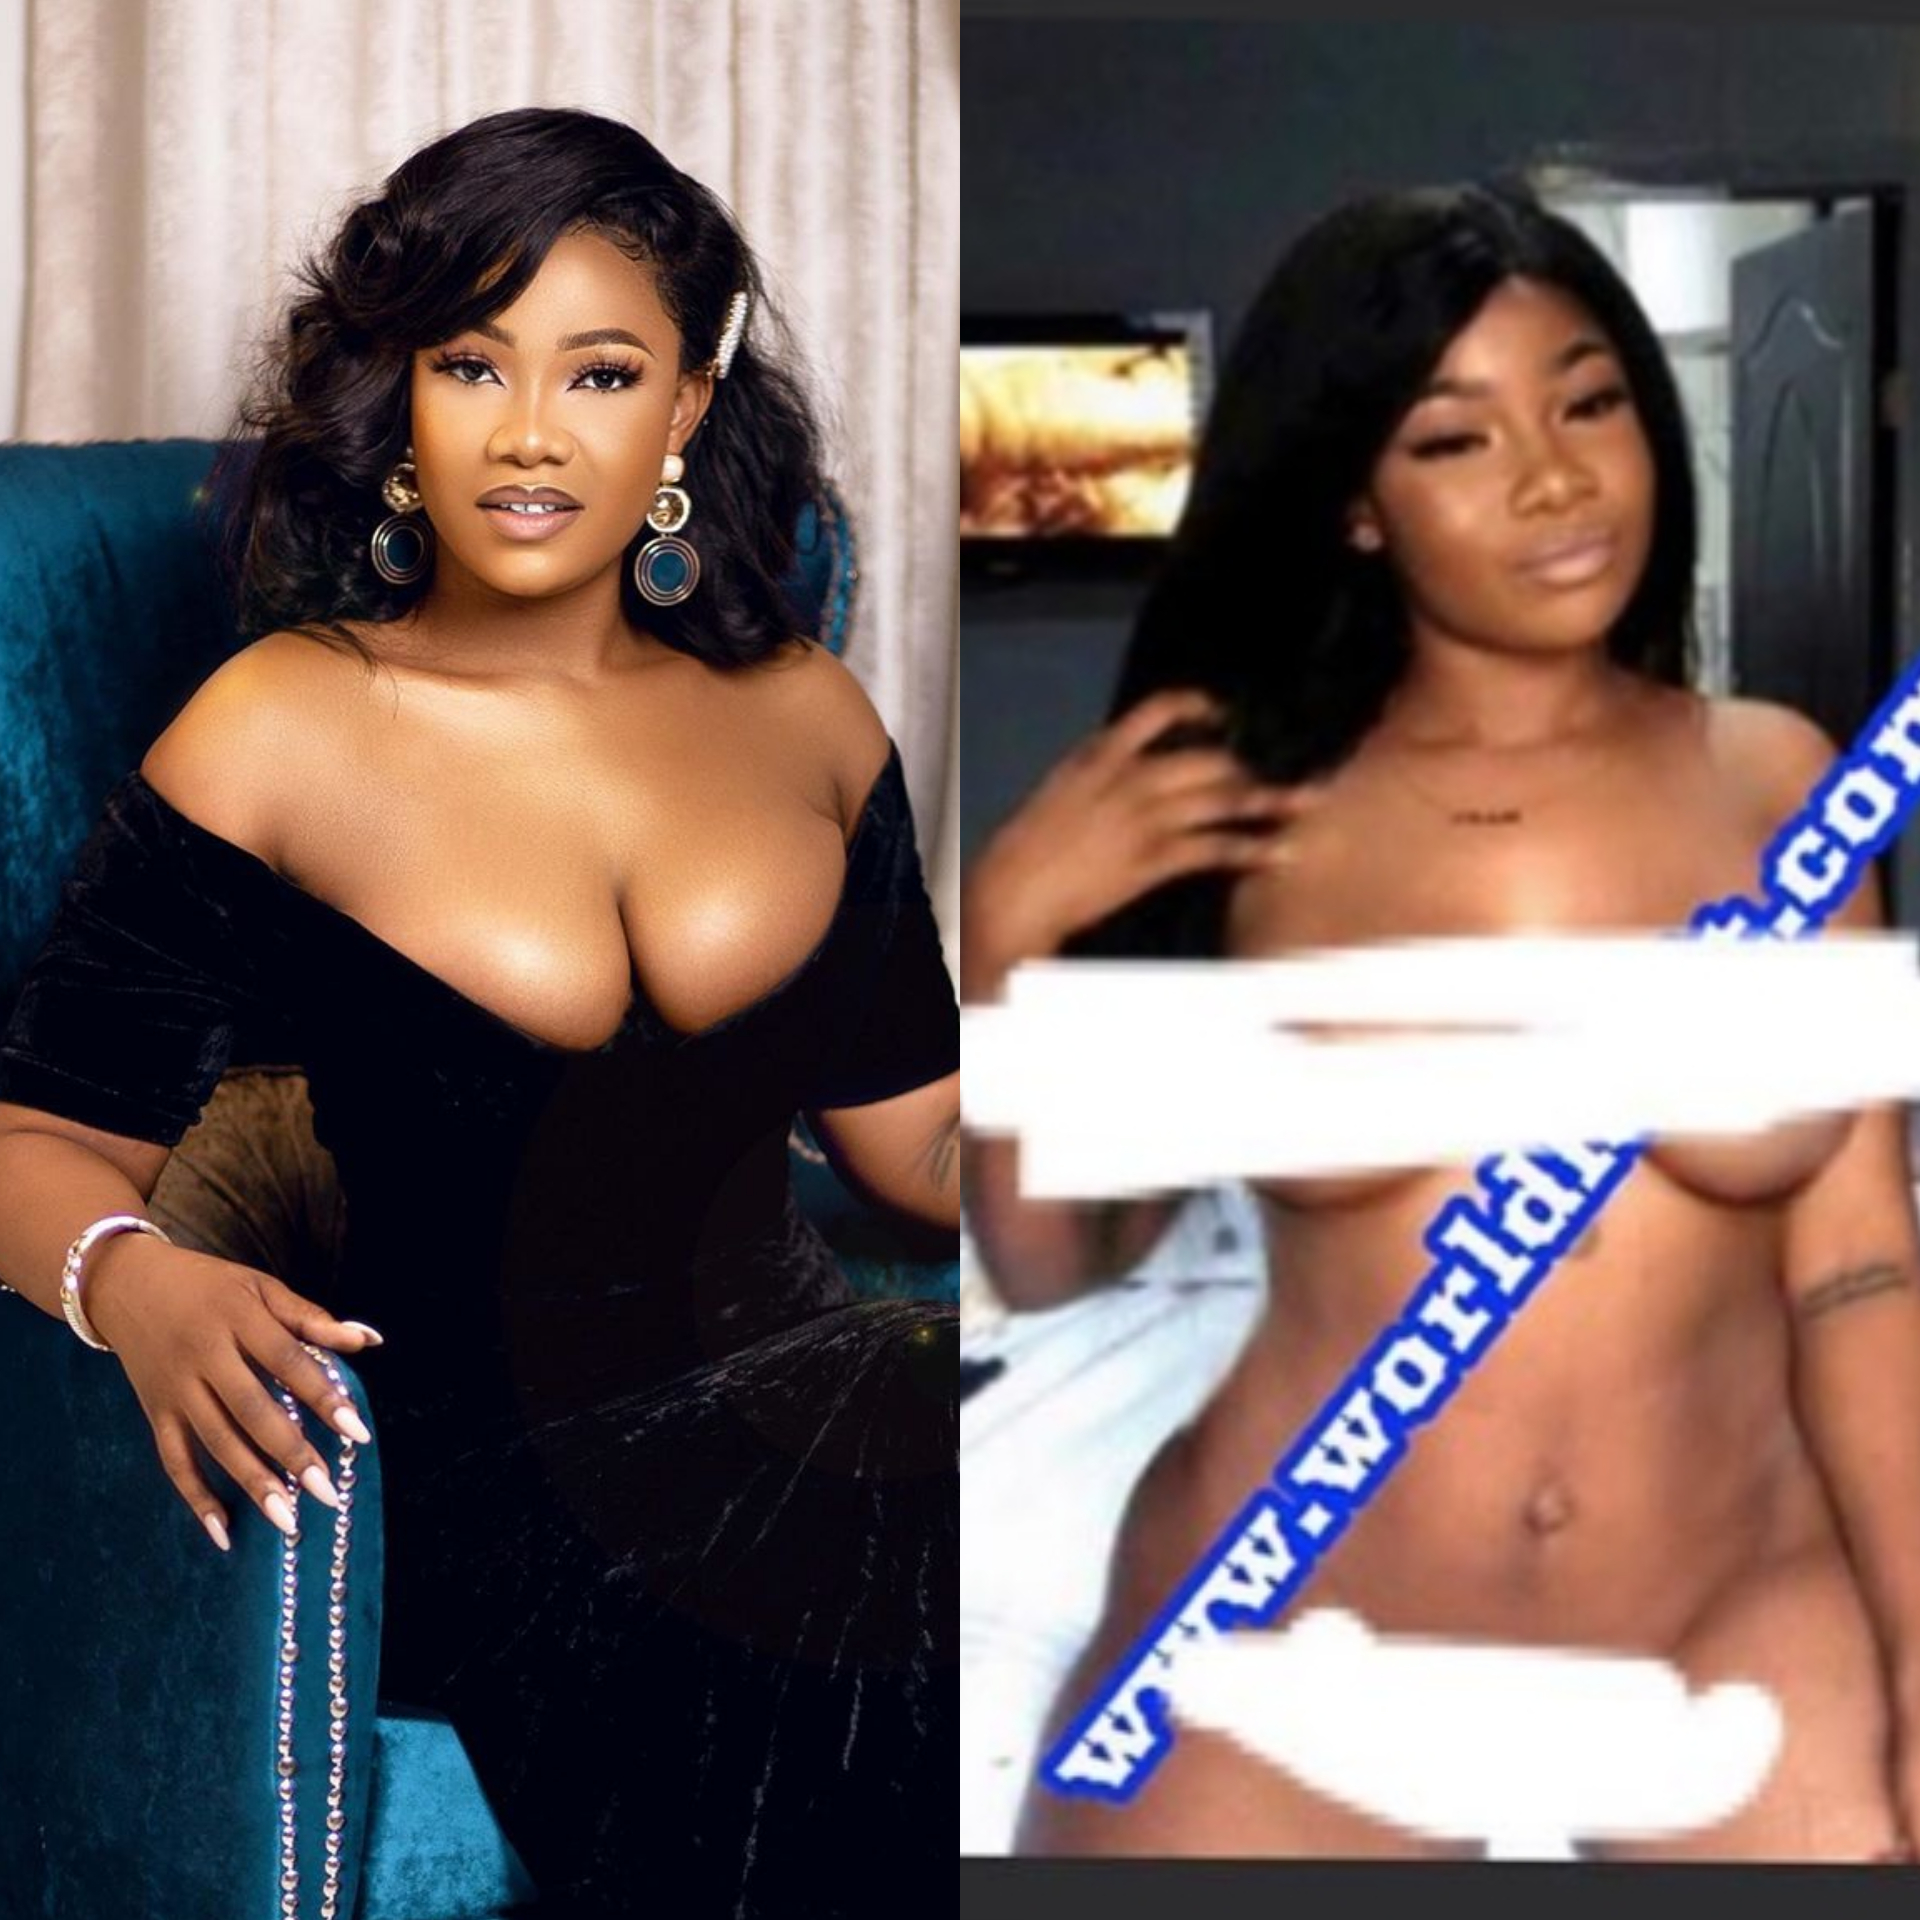 Tacha Outsmarts Blackmailer Threatening To Release Her Nud£ Pictures By Posting Them Herself  